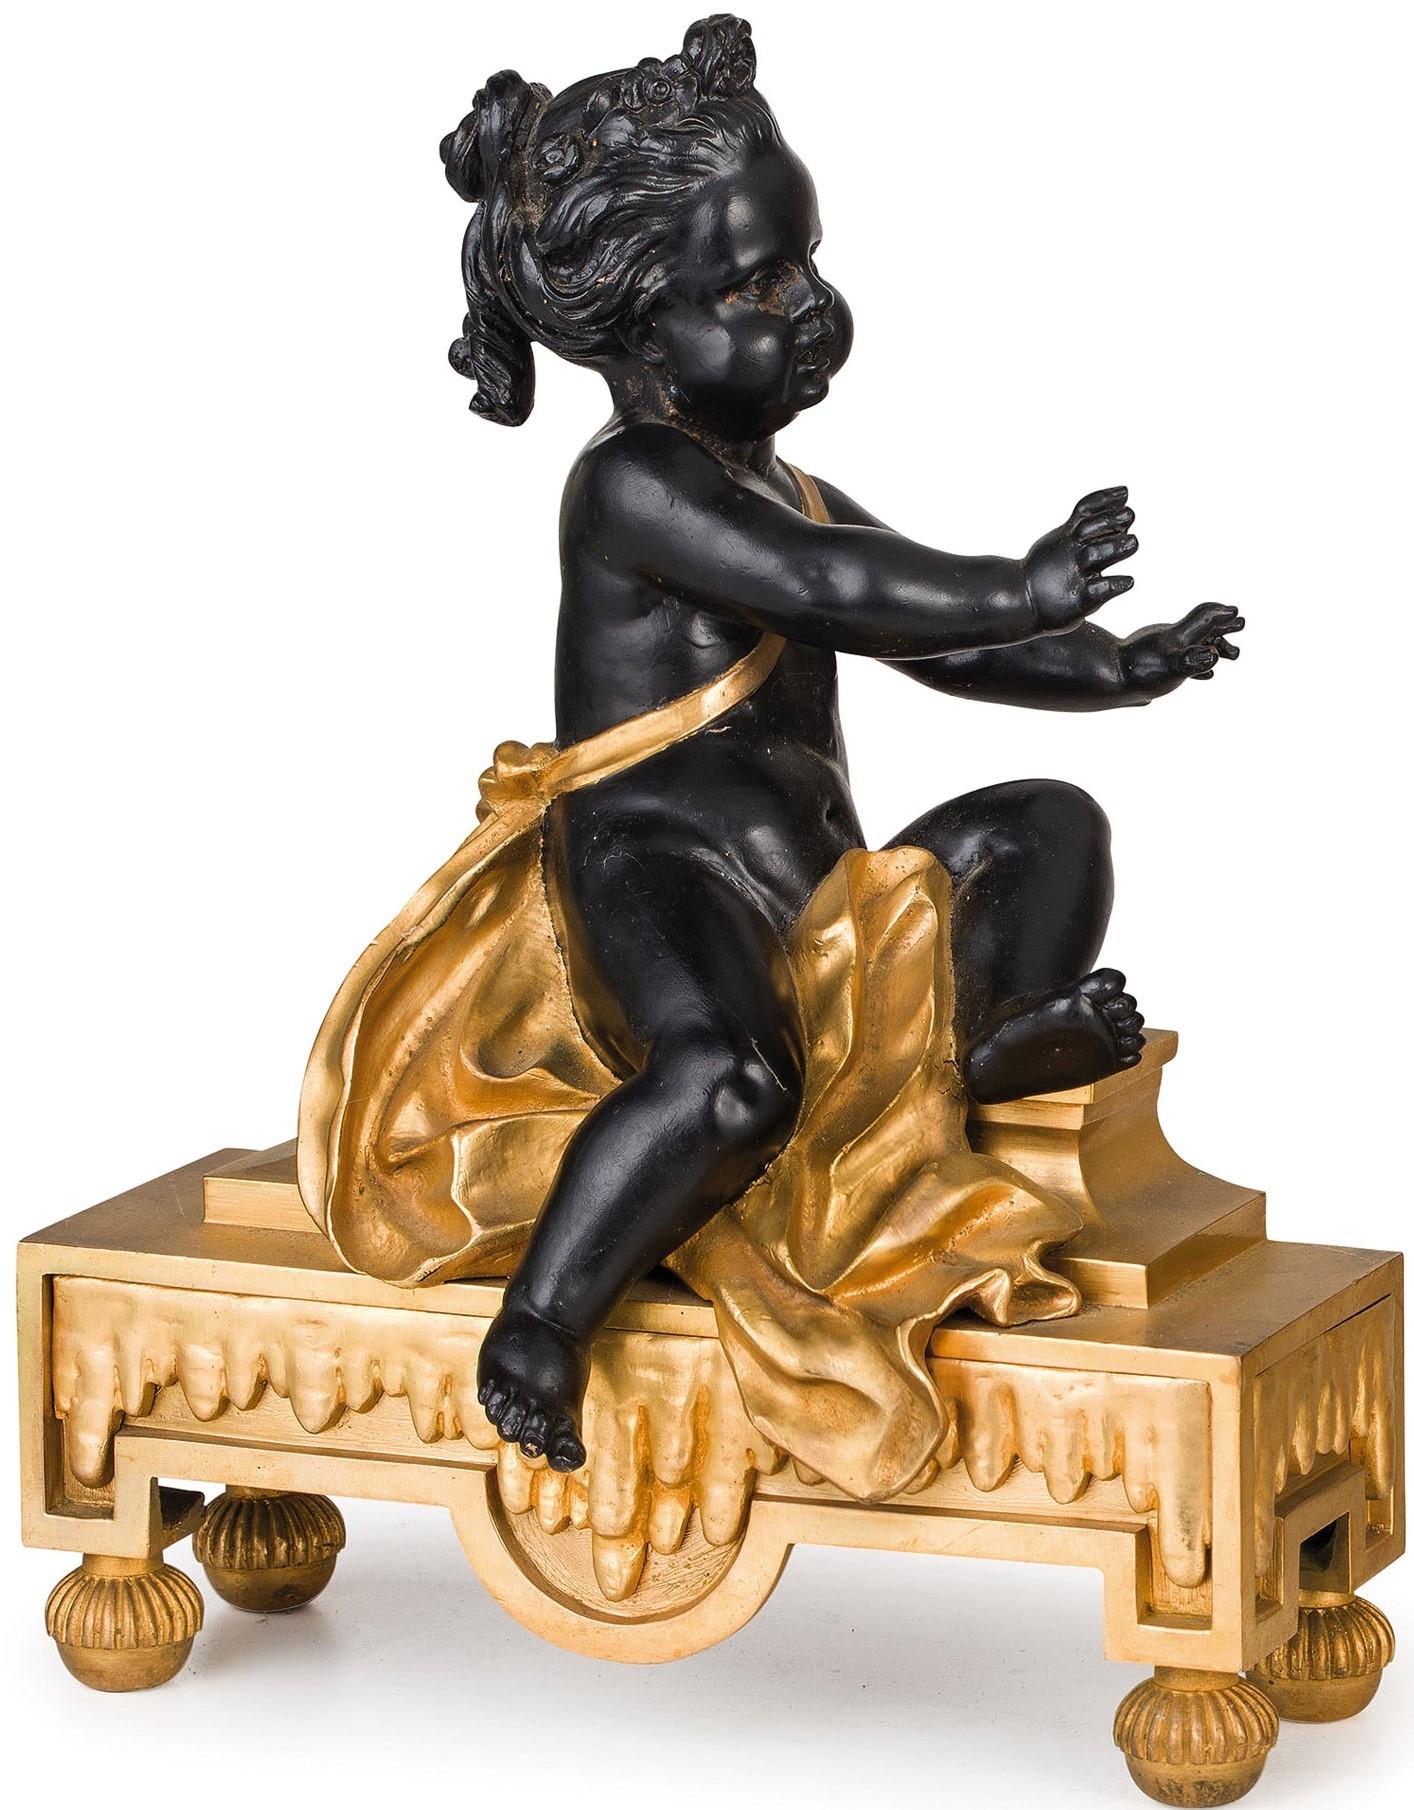 19th century, pair of French Louis XVI style gilt and dark patina bronze fireplace chenets

The charming and particular pair of bronze fireplace chenets was made in the 19th century in France, in Louis XVI style. It represents a pair of children,